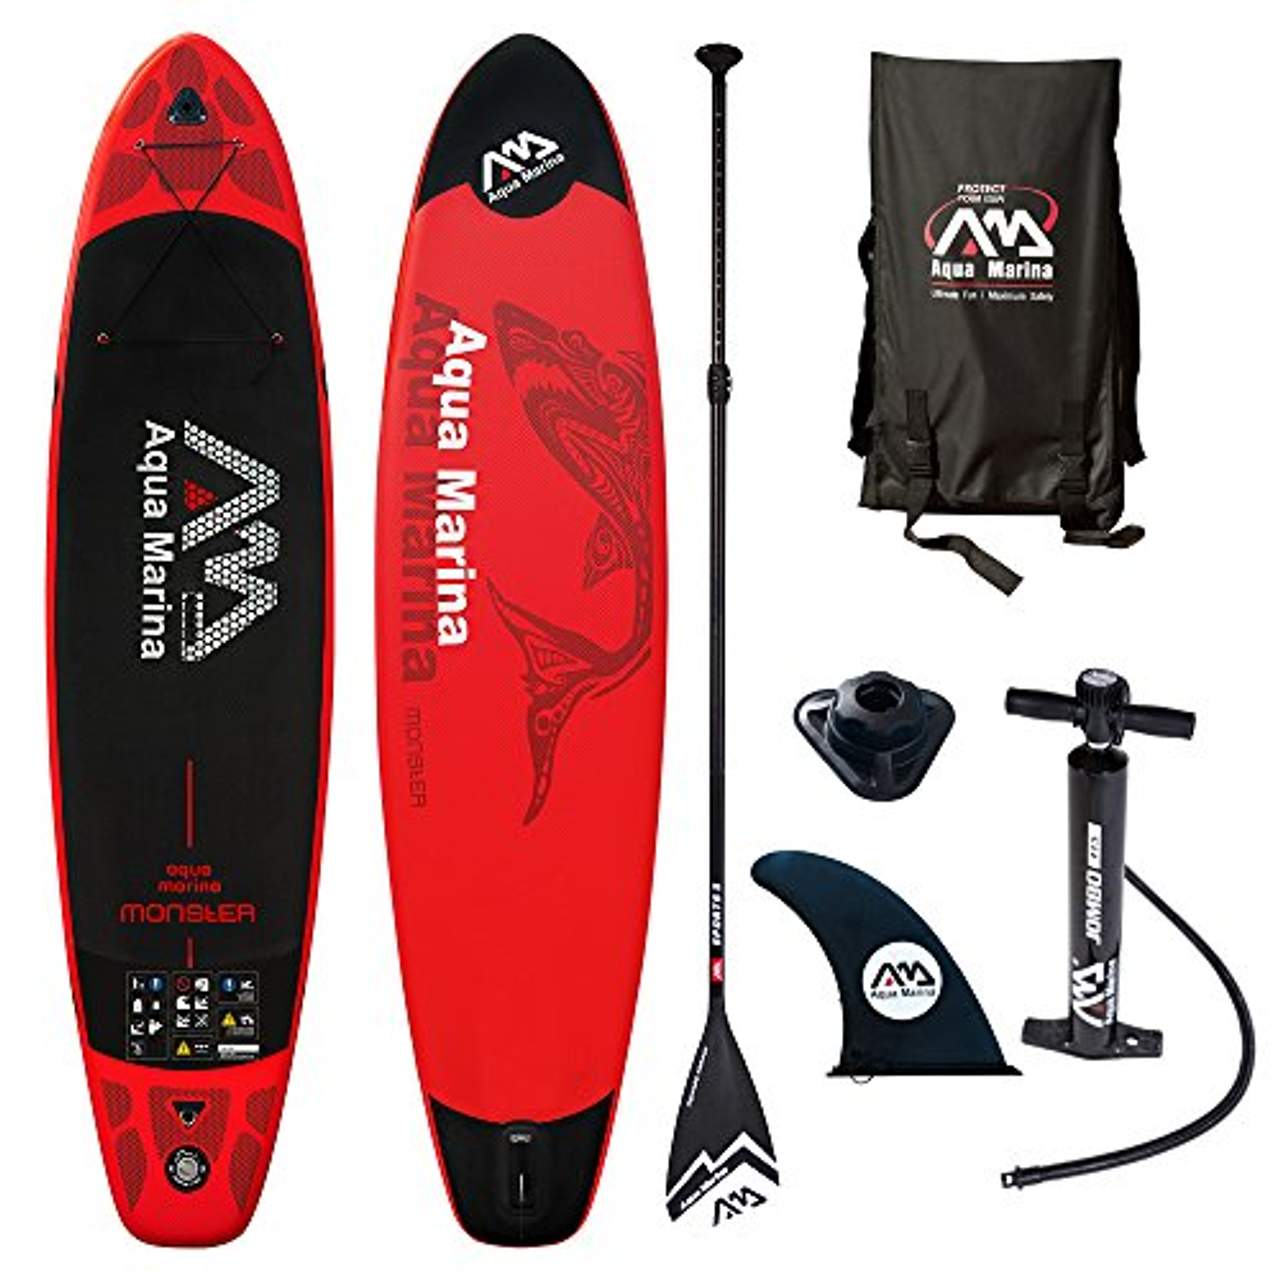 Aqua Marina Monster Modell 2018 12.0 iSUP Sup Stand Up Paddle Board